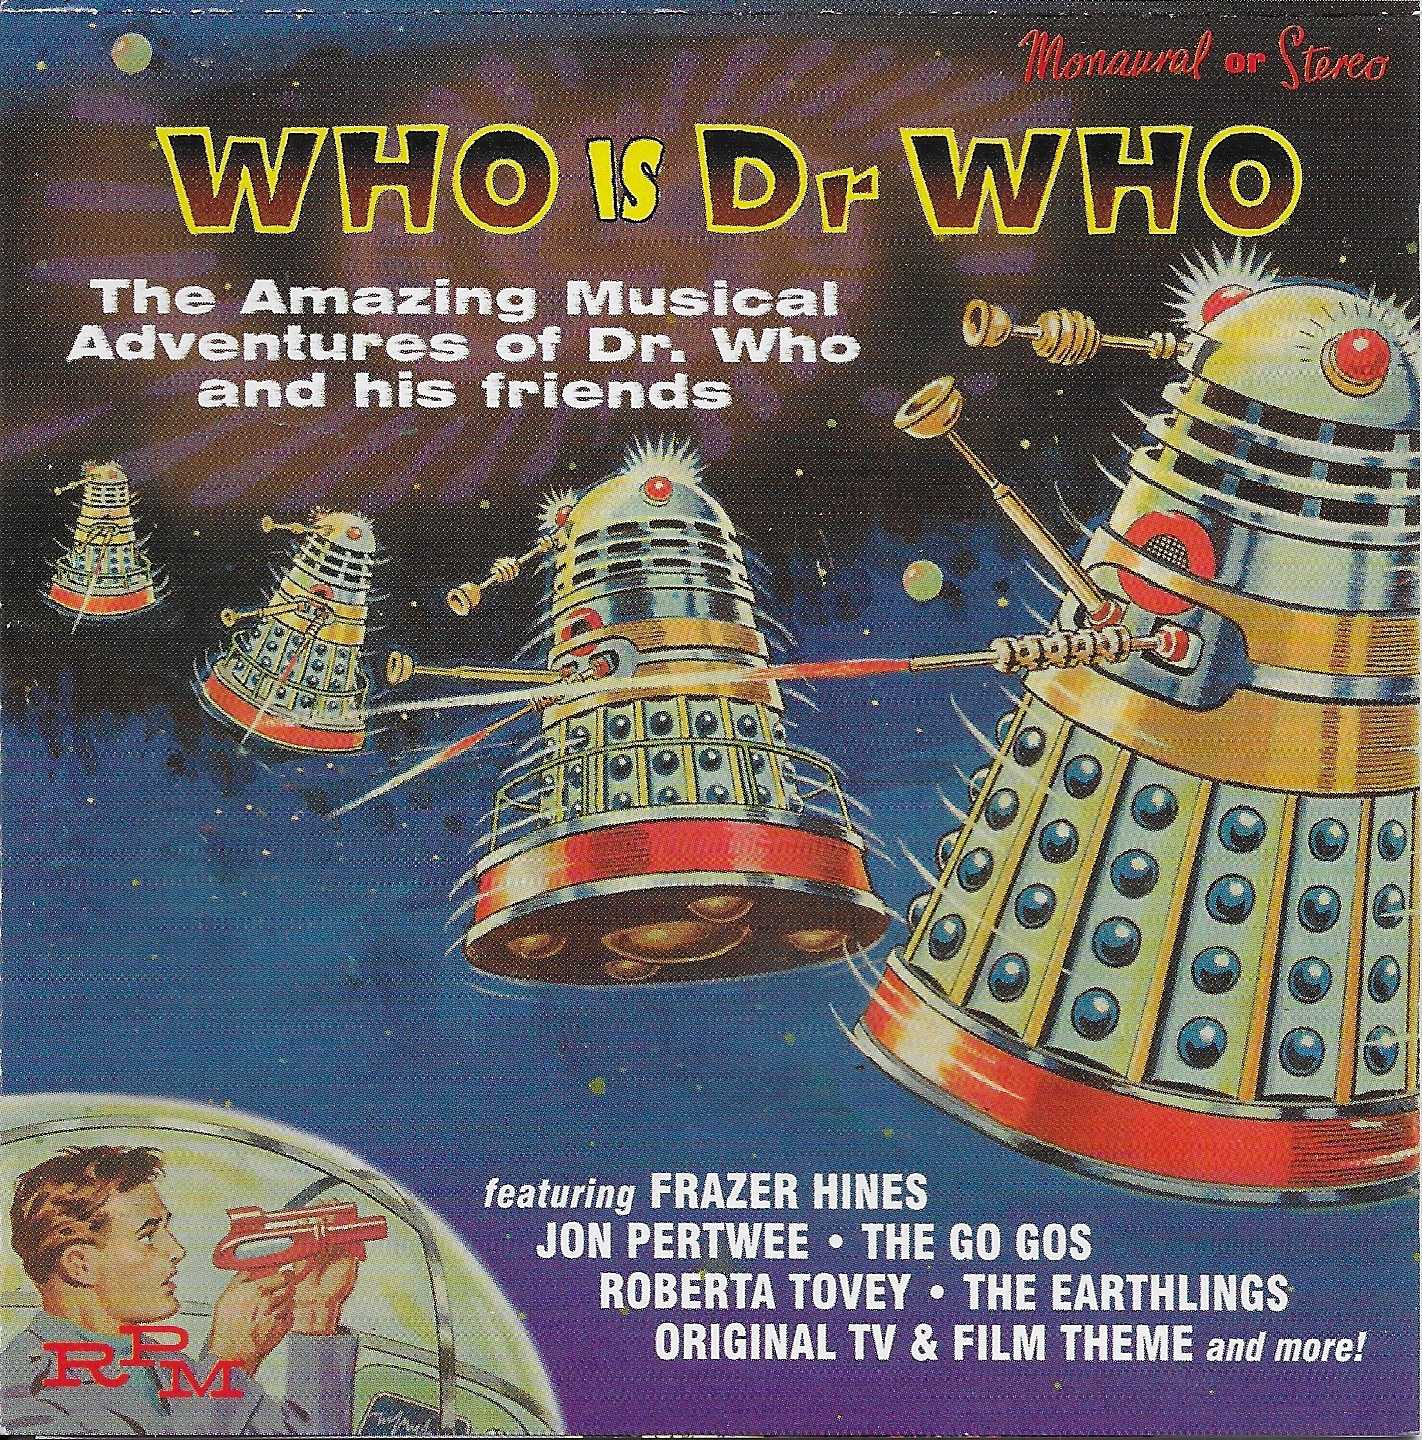 Picture of RPM 200 Who is Doctor Who ? by artist Various from the BBC records and Tapes library